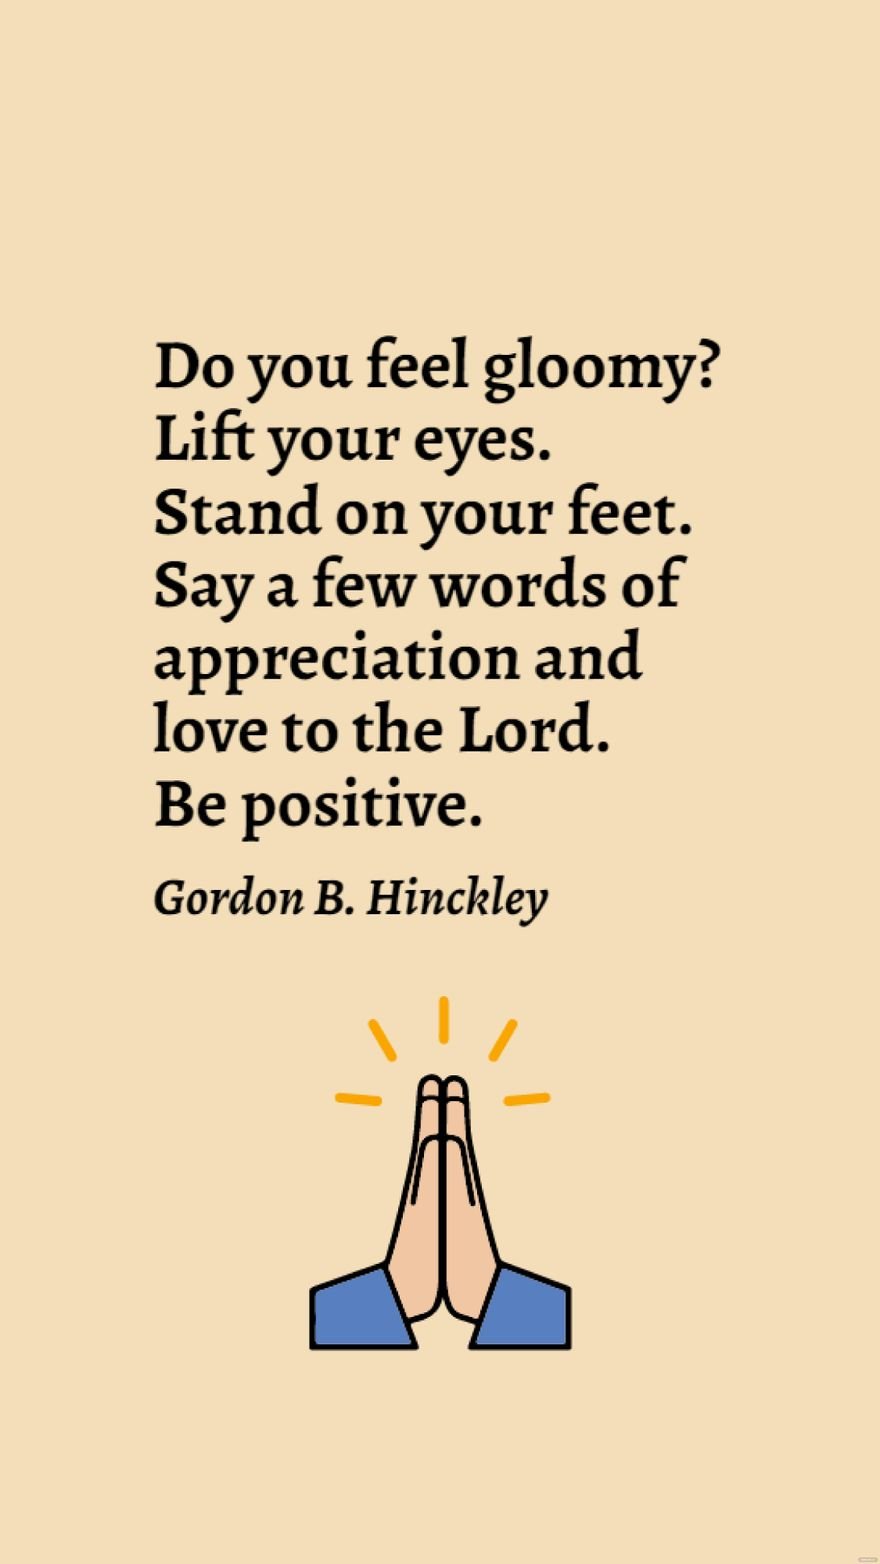 Gordon B. Hinckley - Do you feel gloomy? Lift your eyes. Stand on your feet. Say a few words of appreciation and love to the Lord. Be positive.